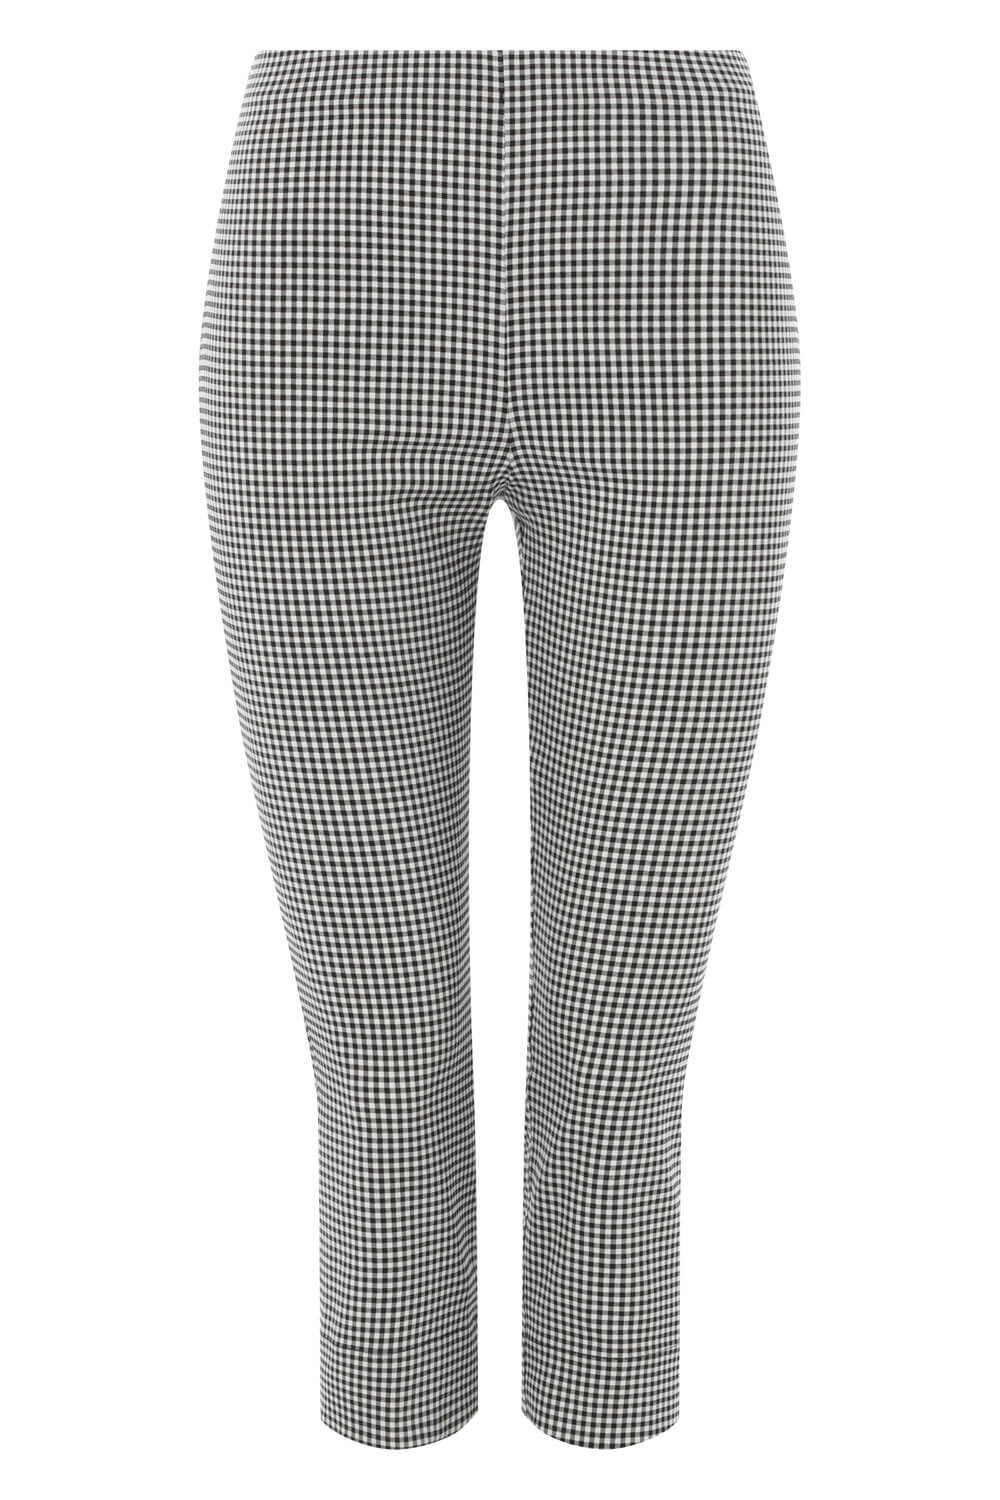 Black Gingham Cropped Stretch Trouser, Image 4 of 5